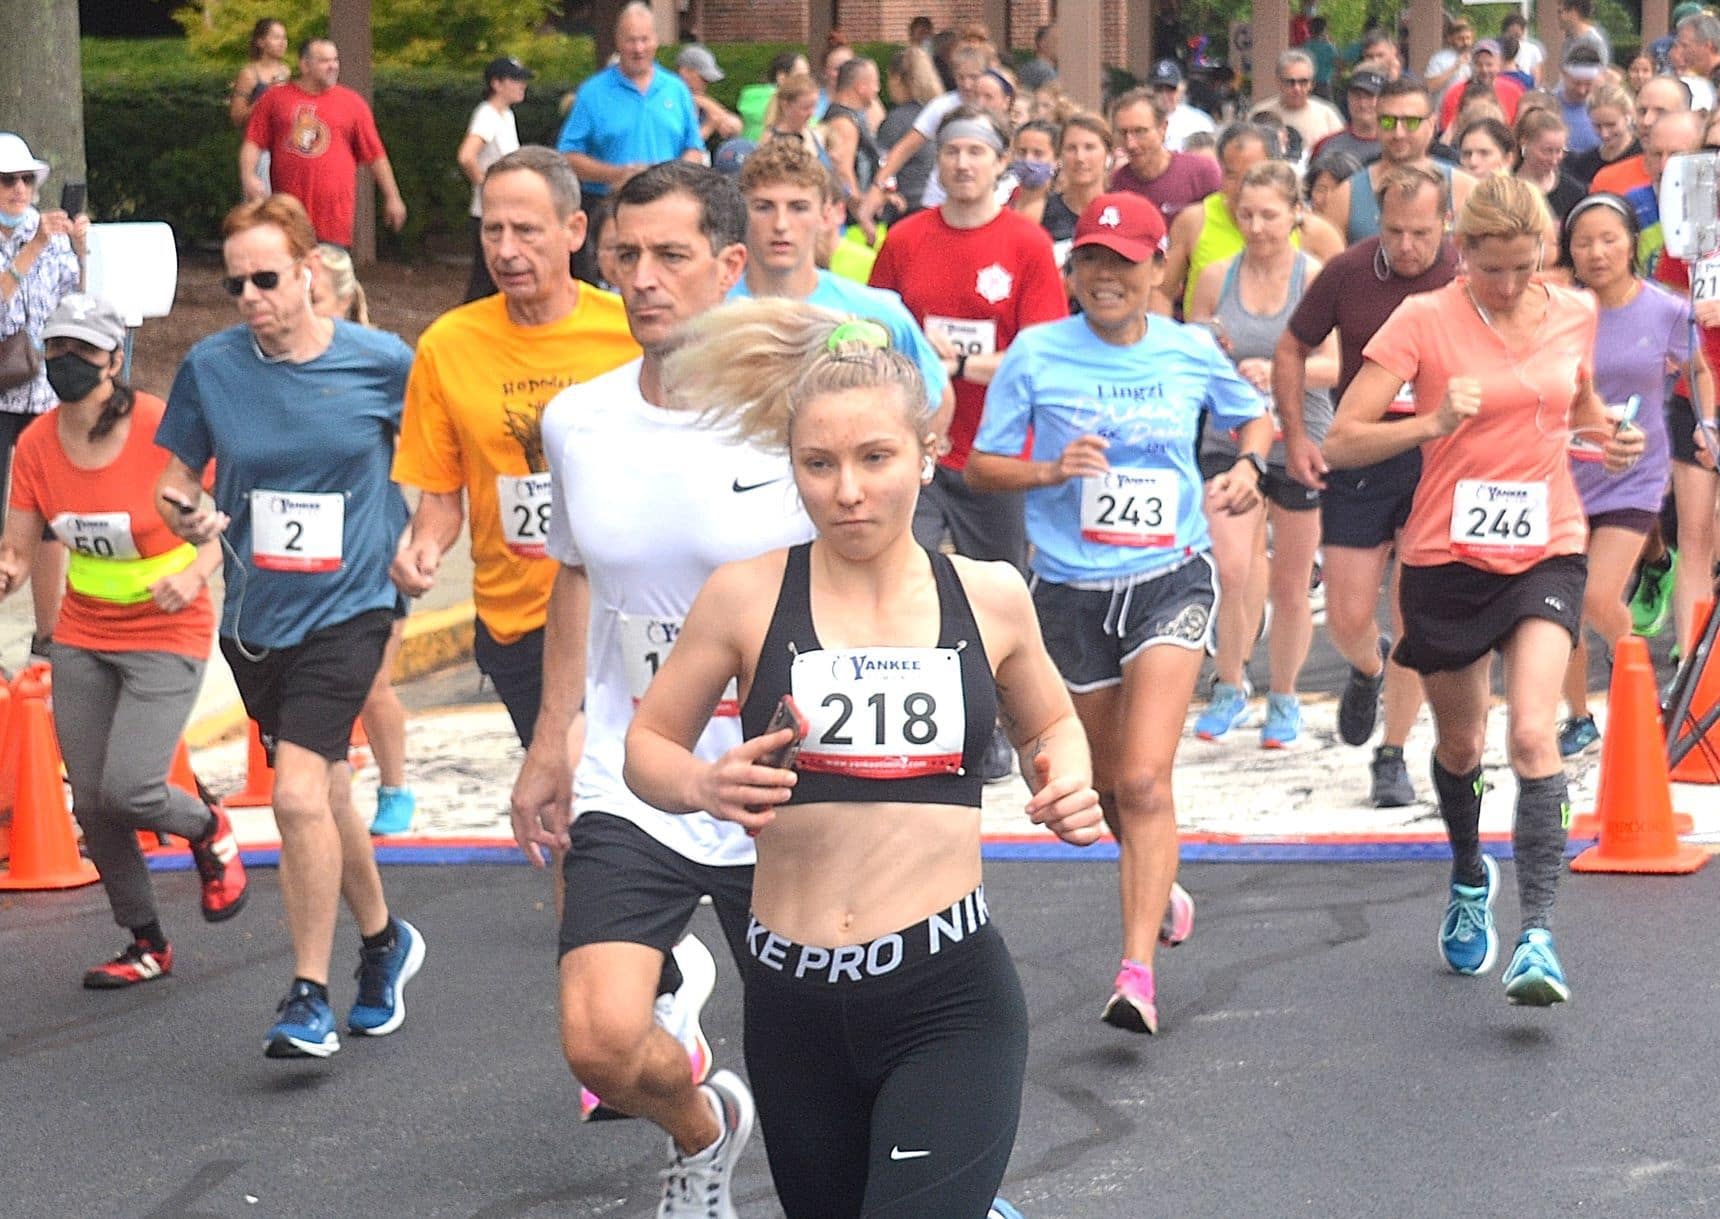 Kaitlin Johnson of Northborough (front, bib #218) is among runners beginning the Applefest 5K Road Race. She was the first-place female, finishing in 22.09.